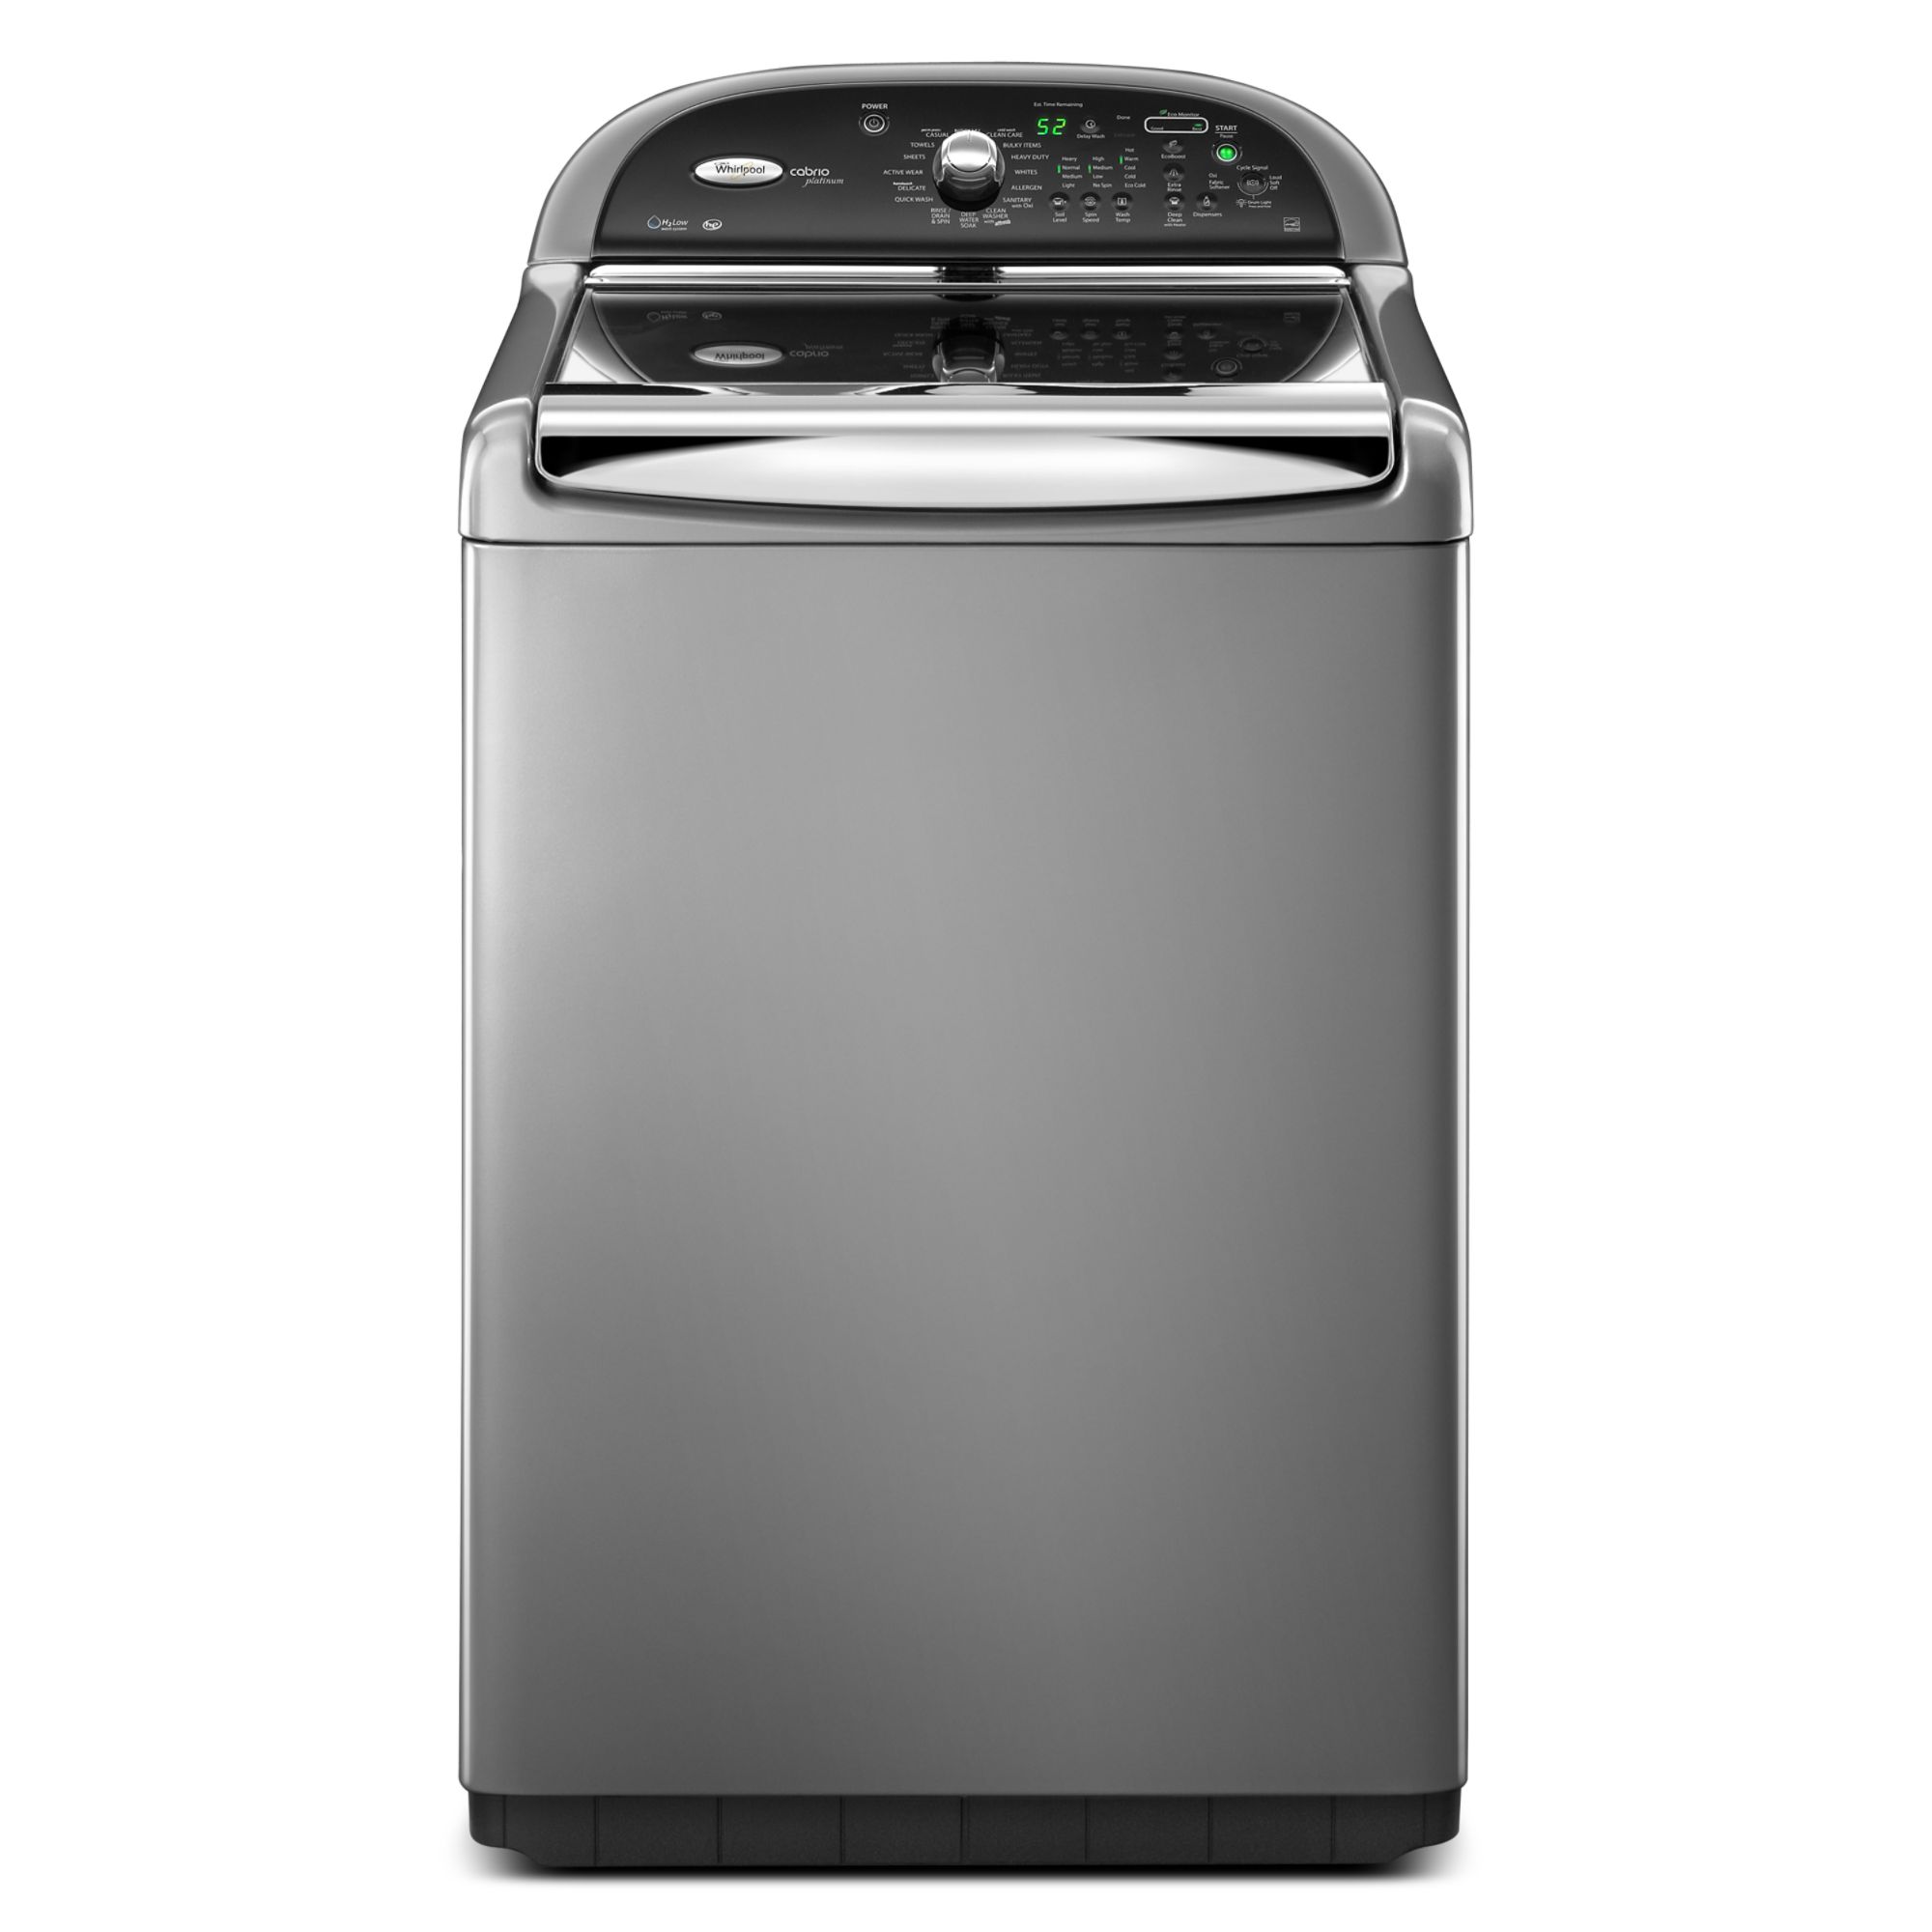 Whirlpool 4.6 cu. ft. Top-Load High-Efficiency Washer